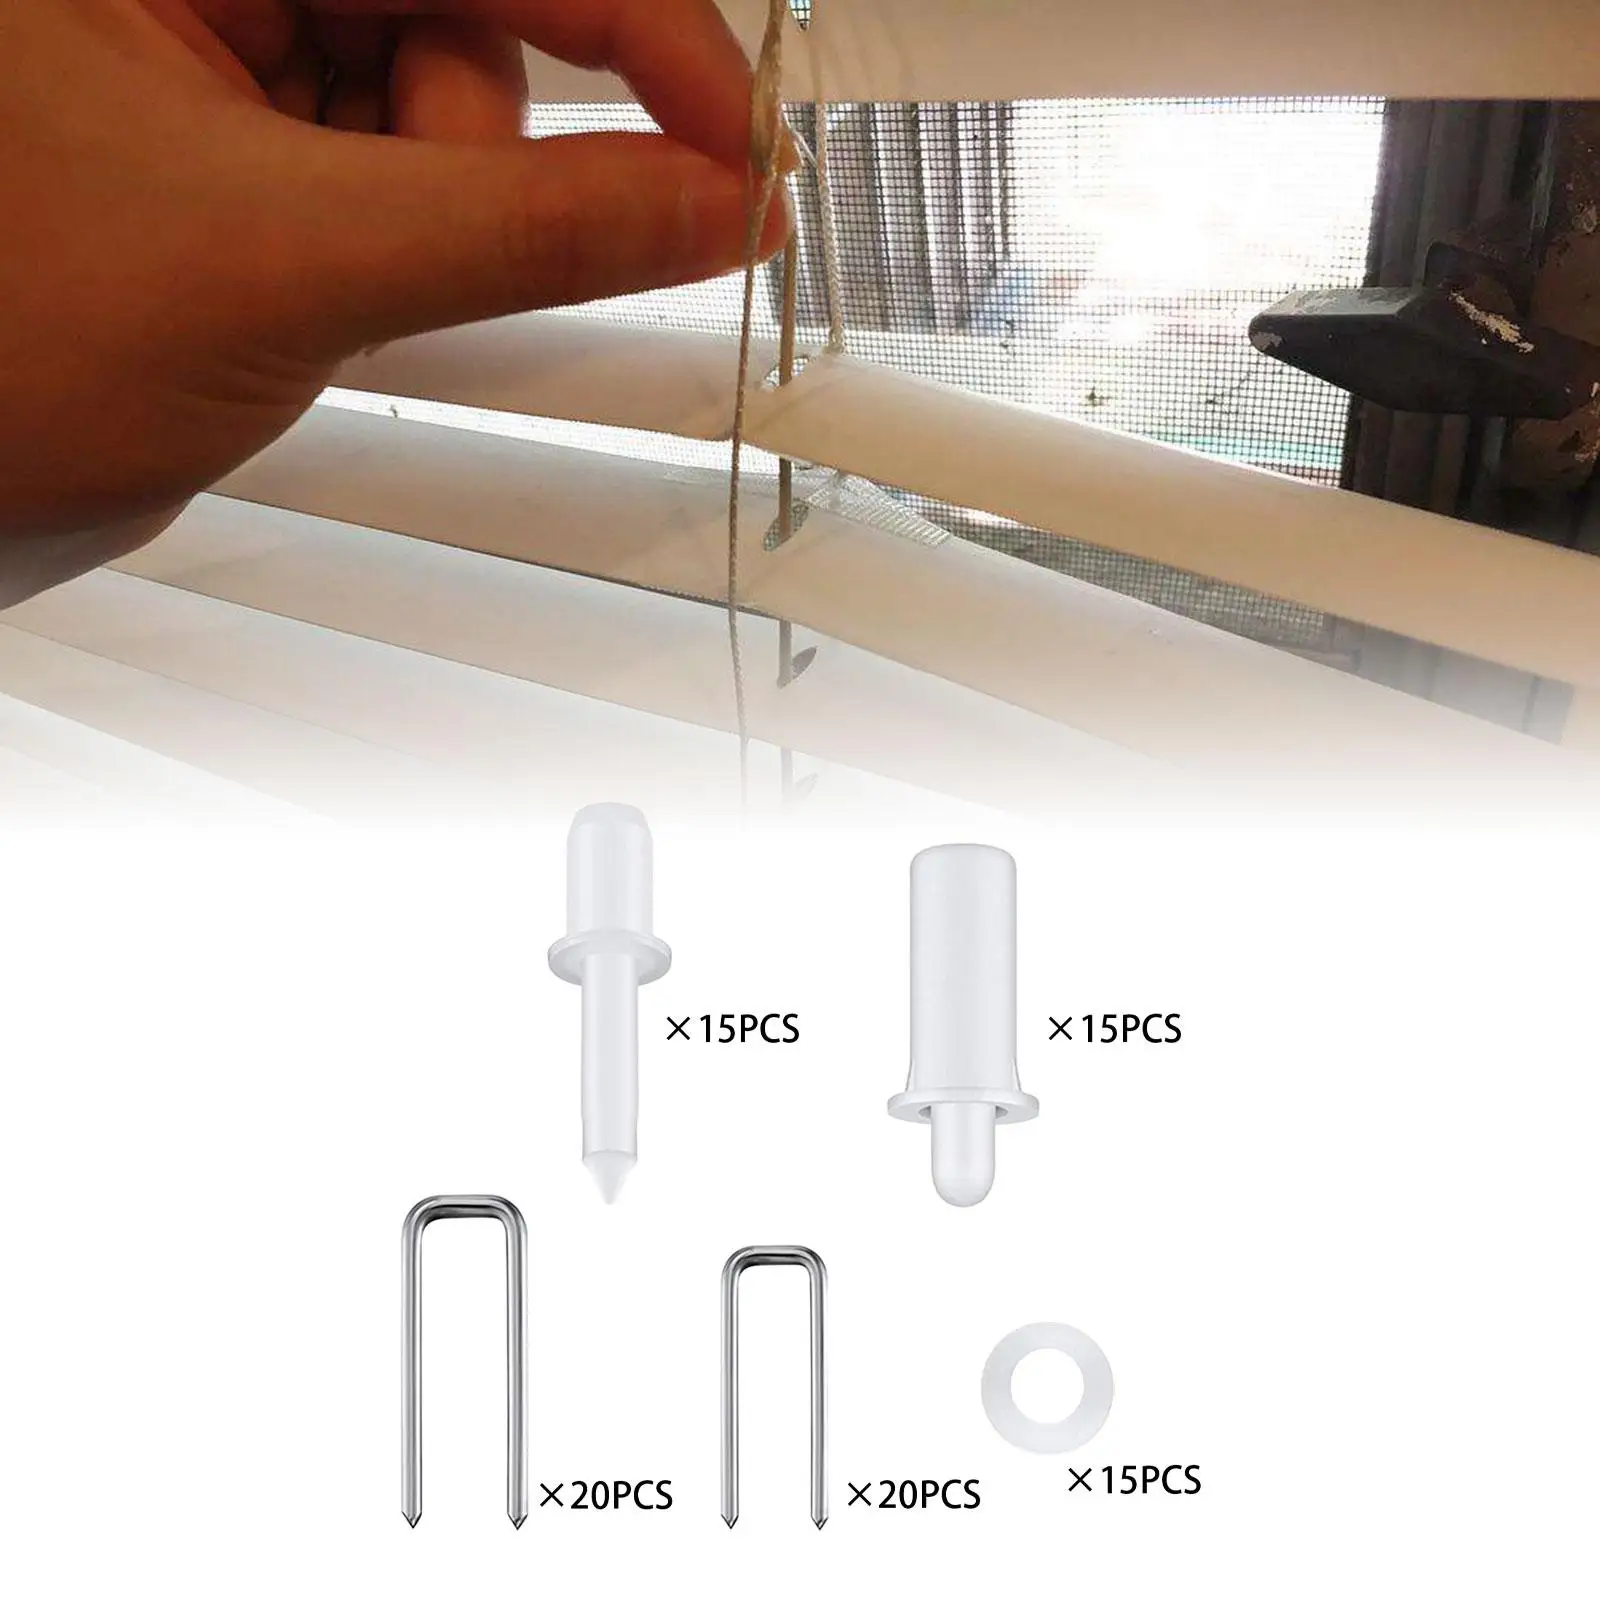 85 Pieces Repair Plantation Shutters Set Fittings Sturdy Durable easy to Use Replaces Louvers Staples for home curtain